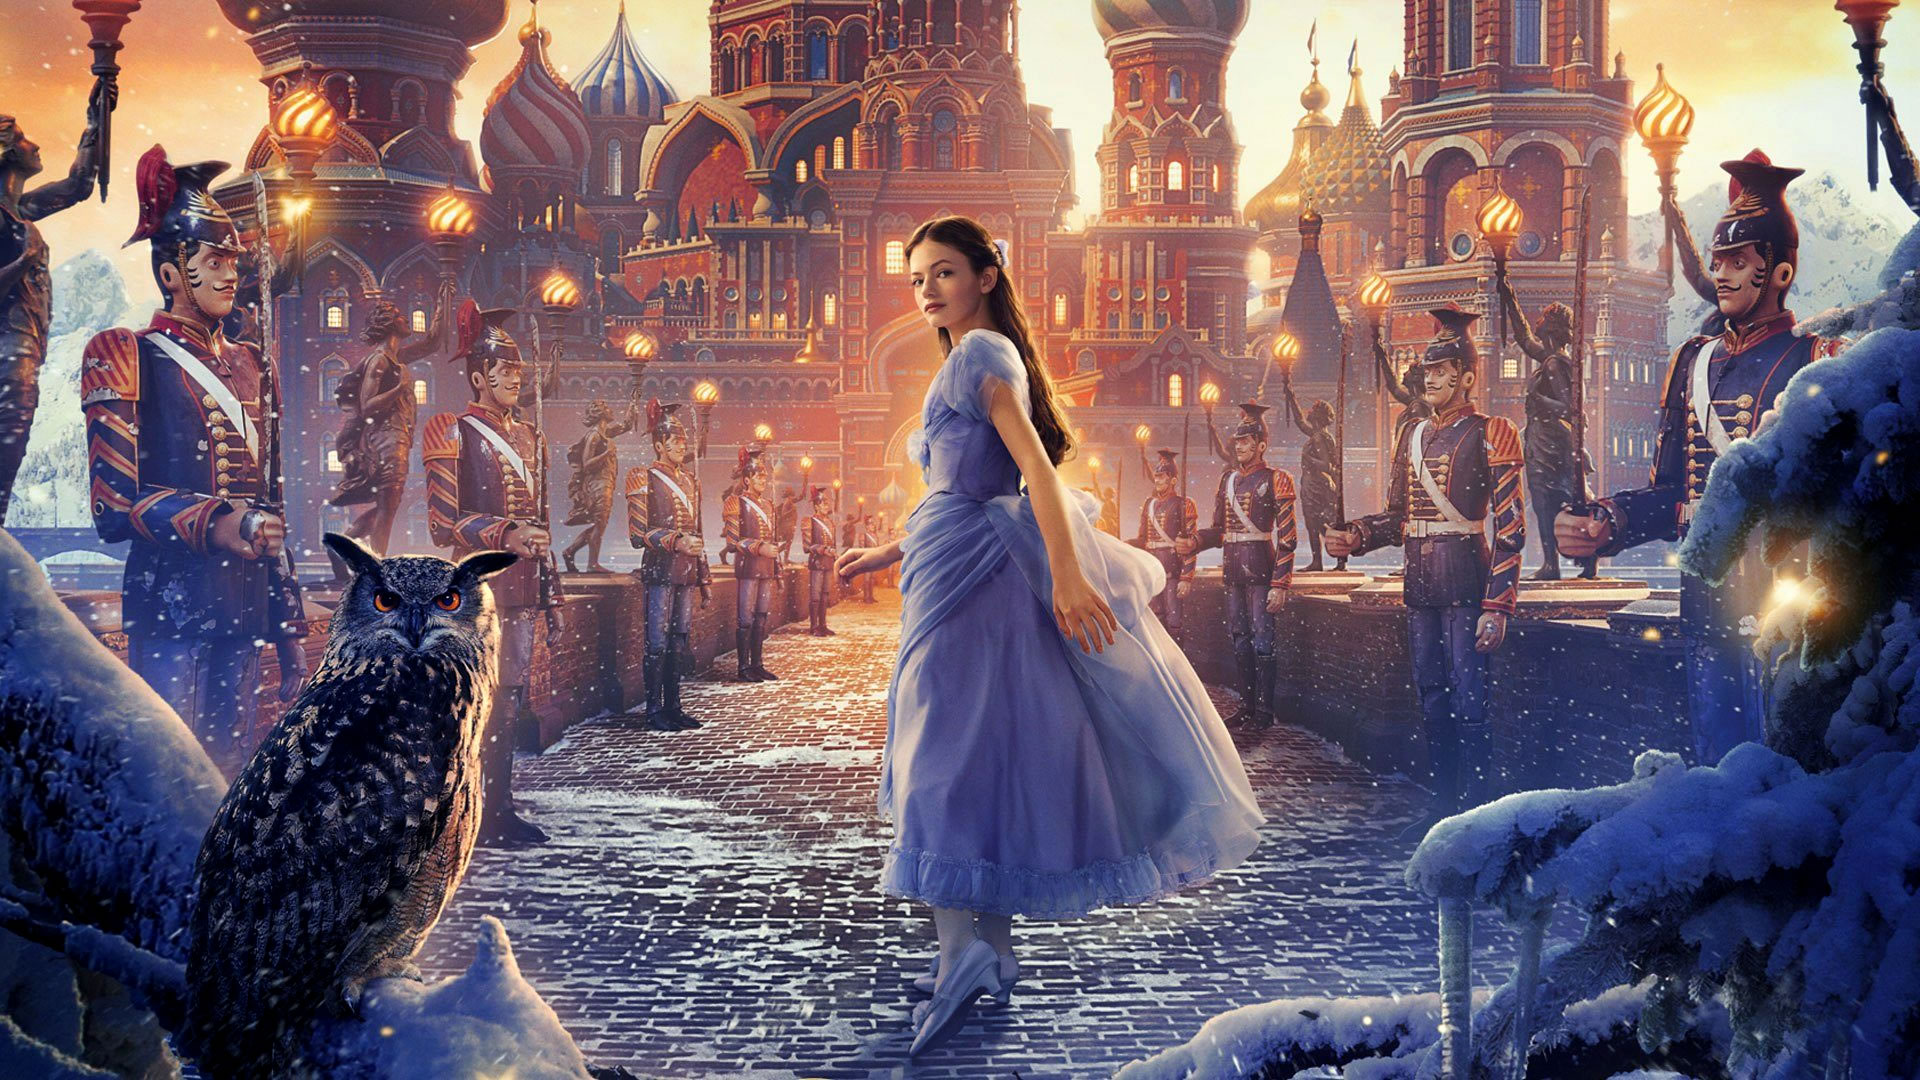 download wallpaper: Nutcracker and the Four Realms wallpaper